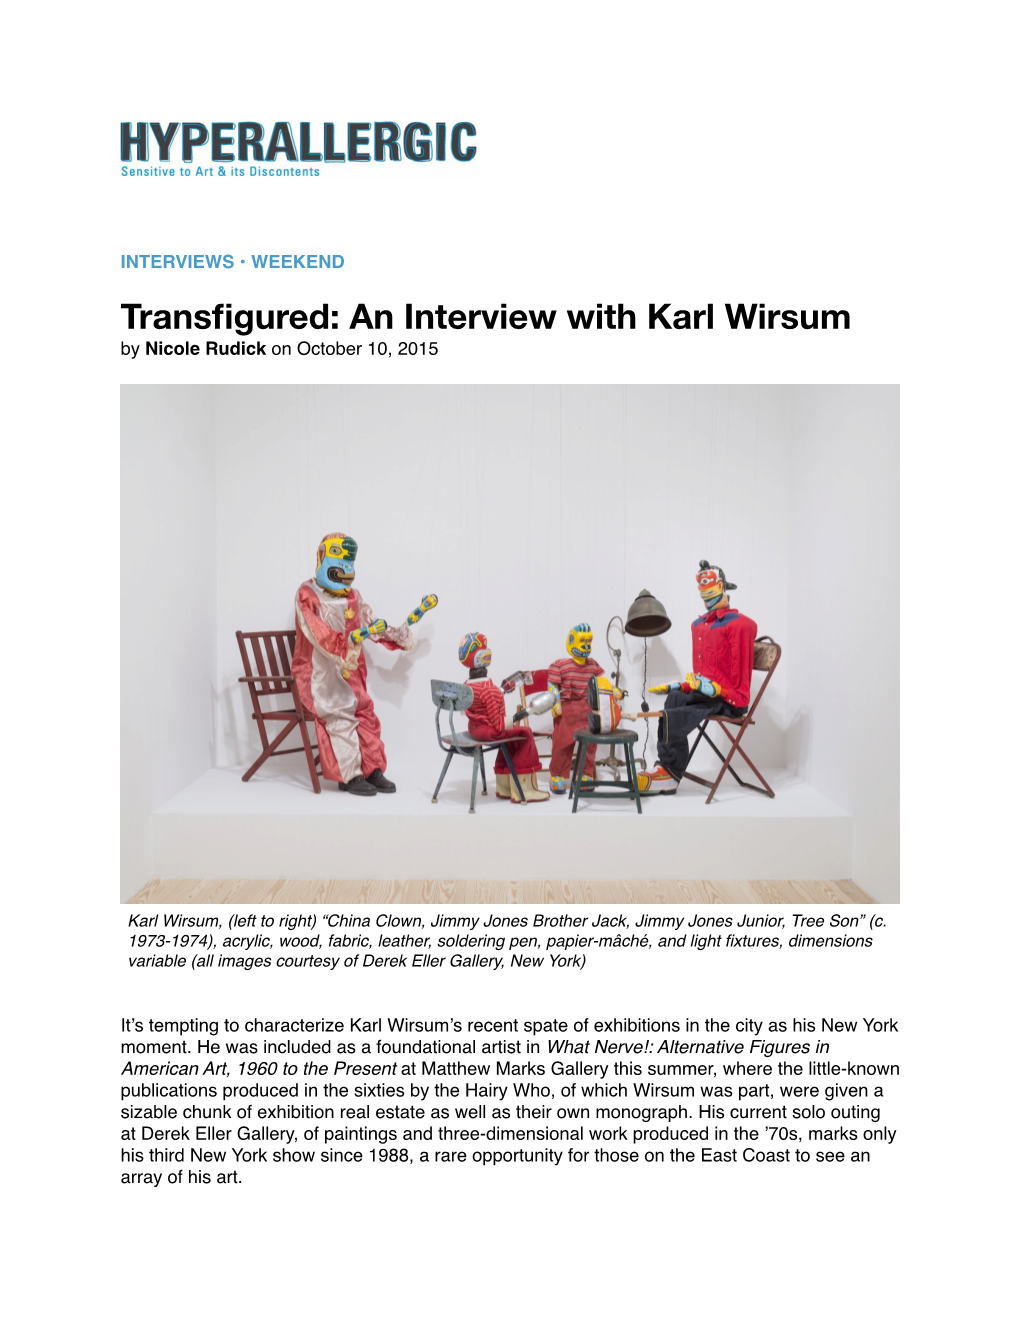 An Interview with Karl Wirsum by Nicole Rudick on October 10, 2015